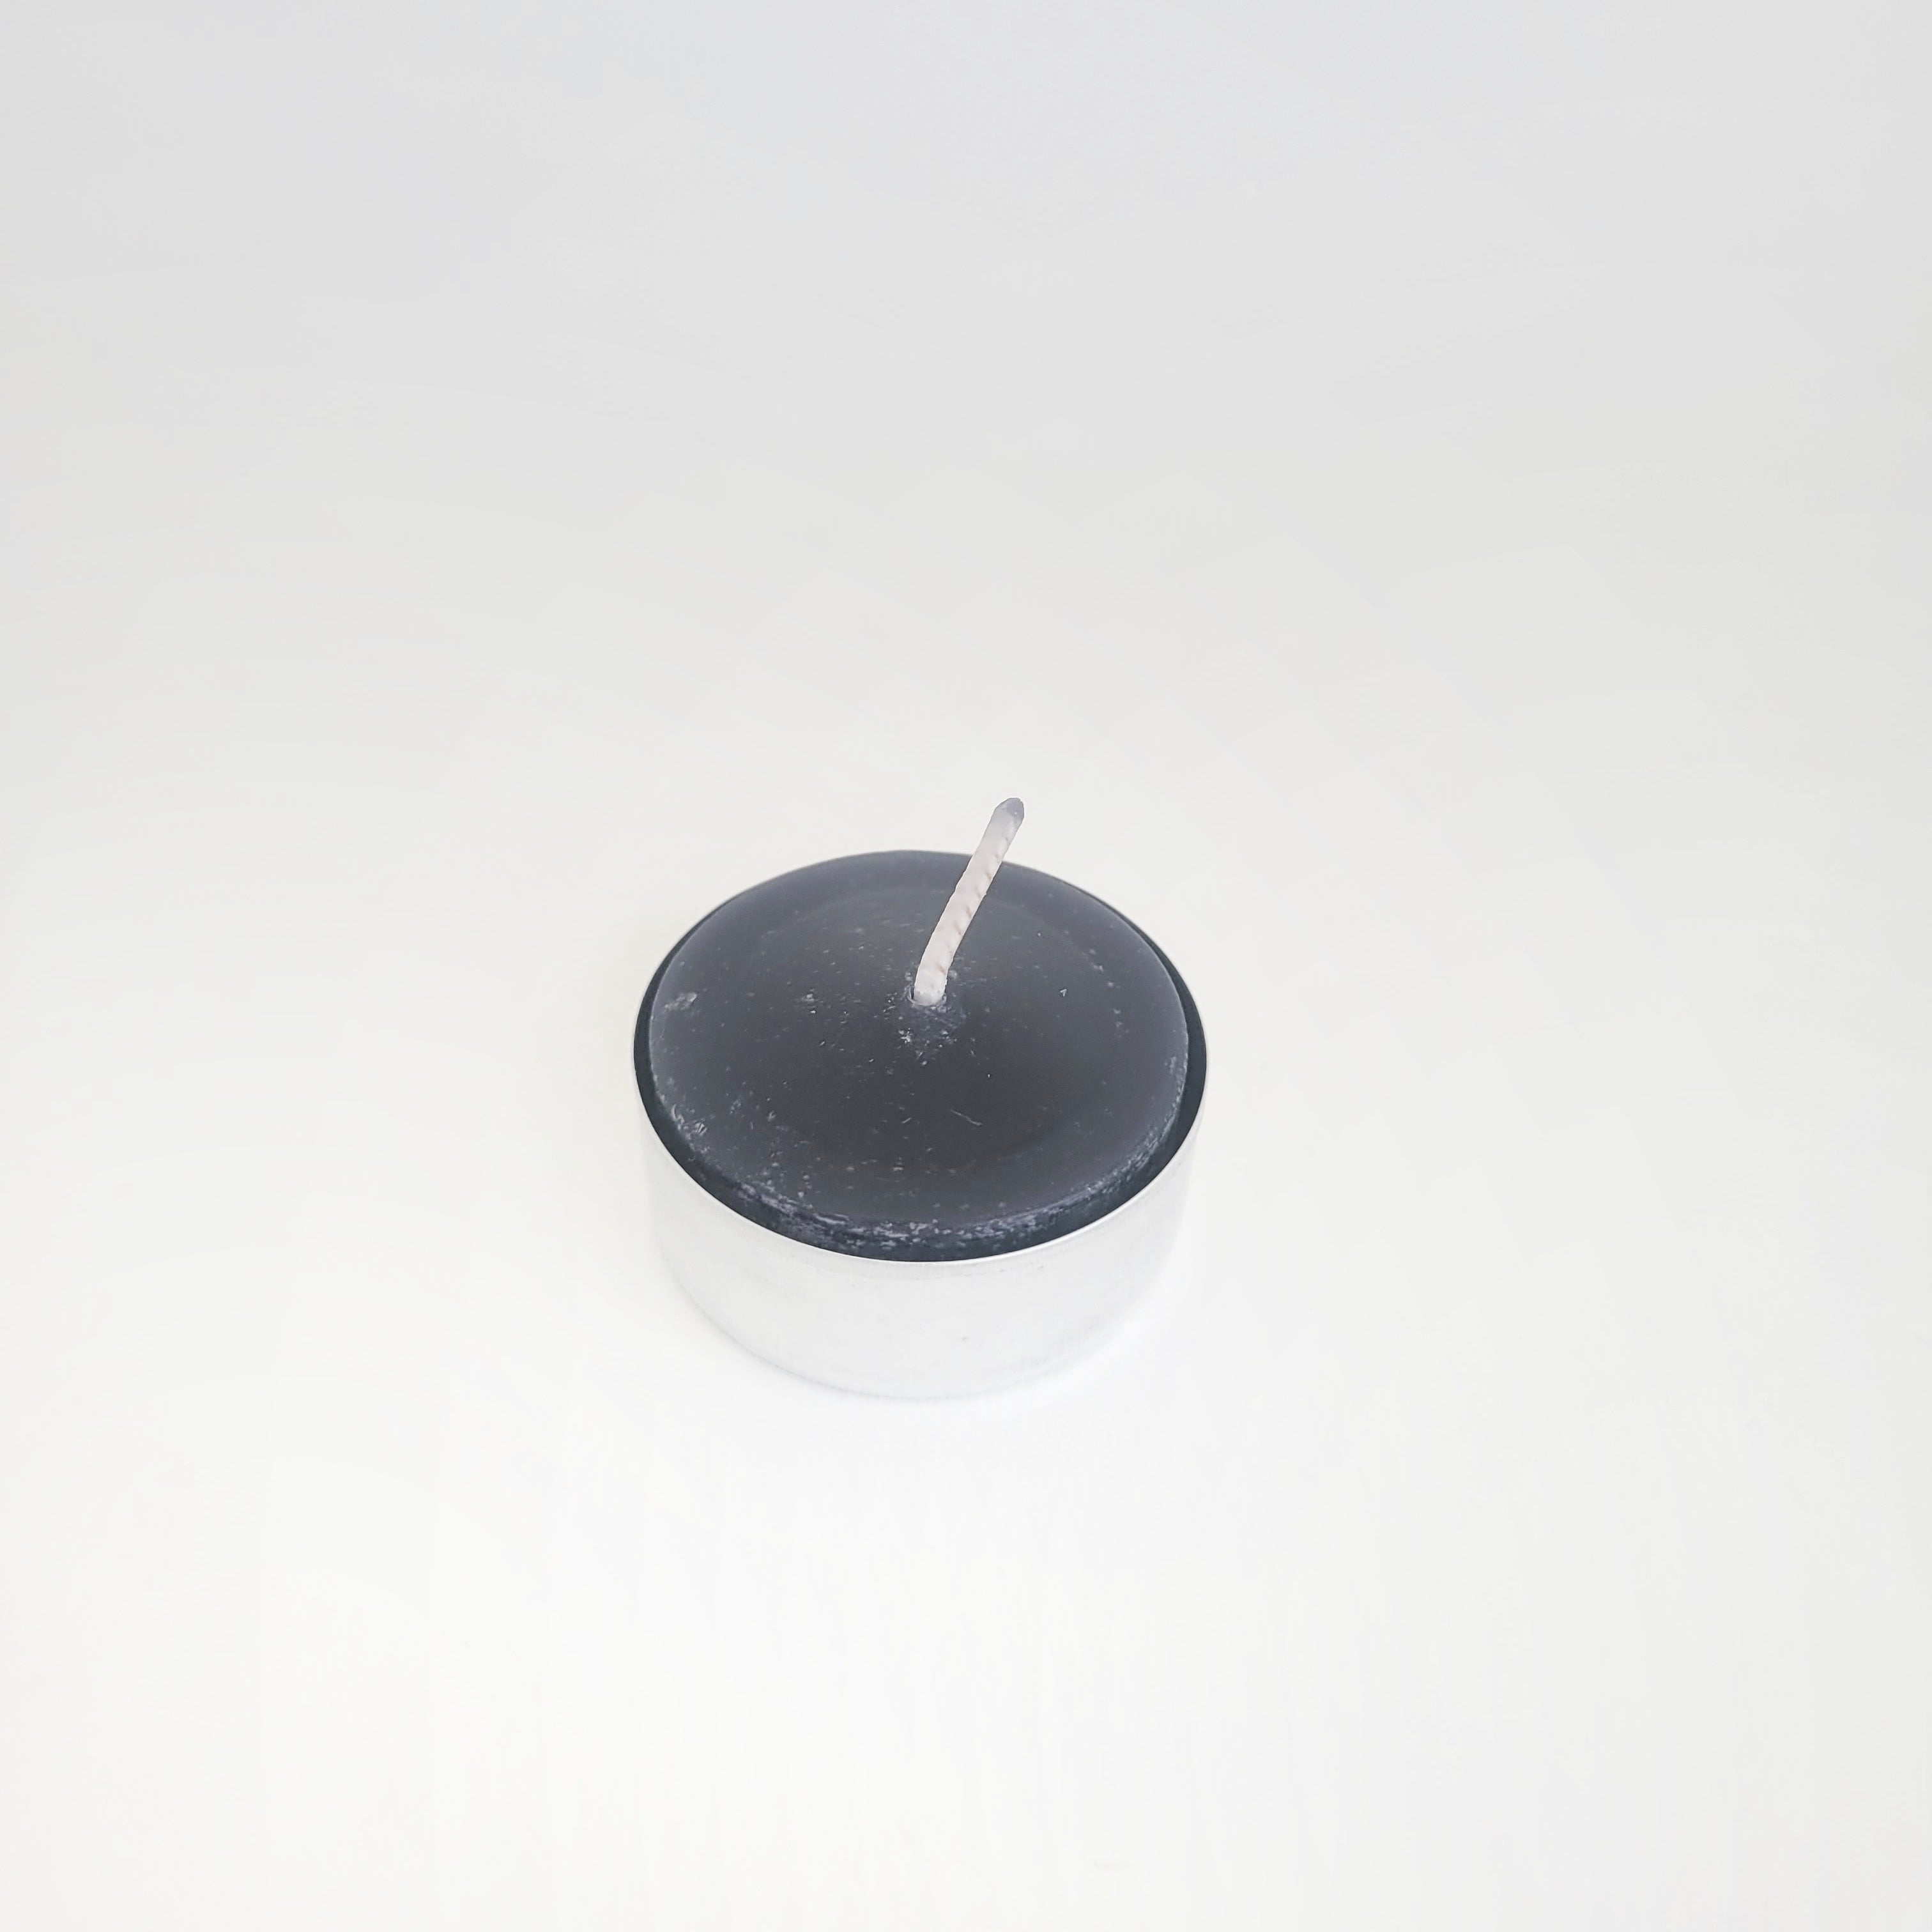 Single beeswax tealight in a tin cup, with a striking black color, perfect for eco-friendly home decor and ambiance.